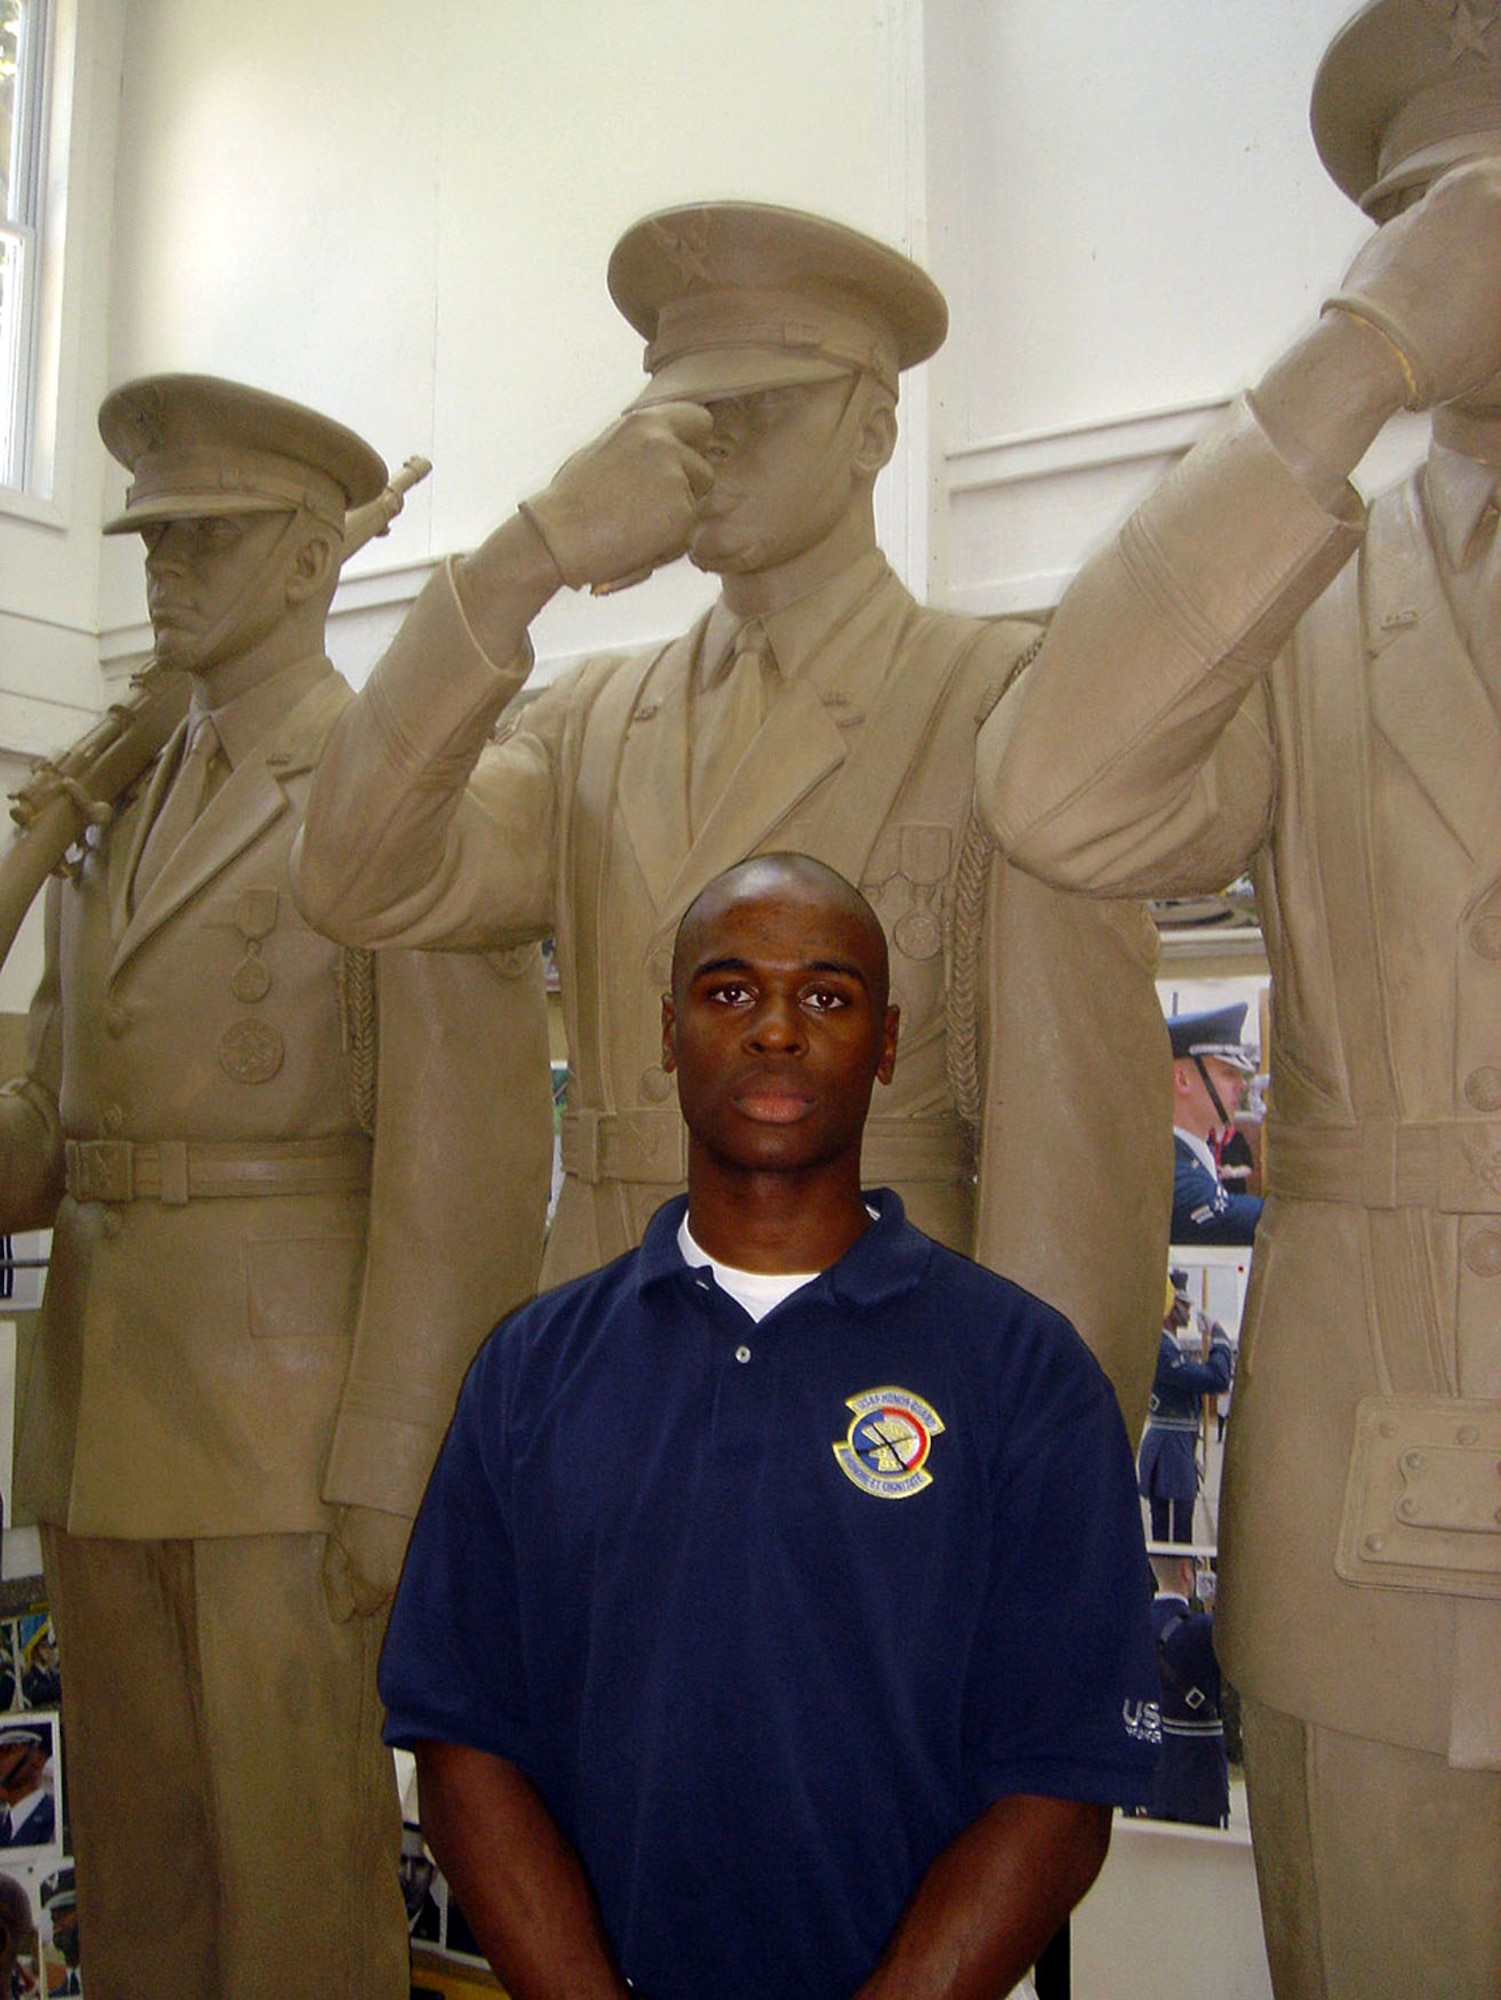 Senior Airman Michael Goodwin stands in front of the Air Force Honor Guard statue while still in production in July 2005.  Airman Goodwin was used as a model for one of the bronze sculptures now residing at the Air Force Memorial. (U.S. Air Force photo)                                                                                      